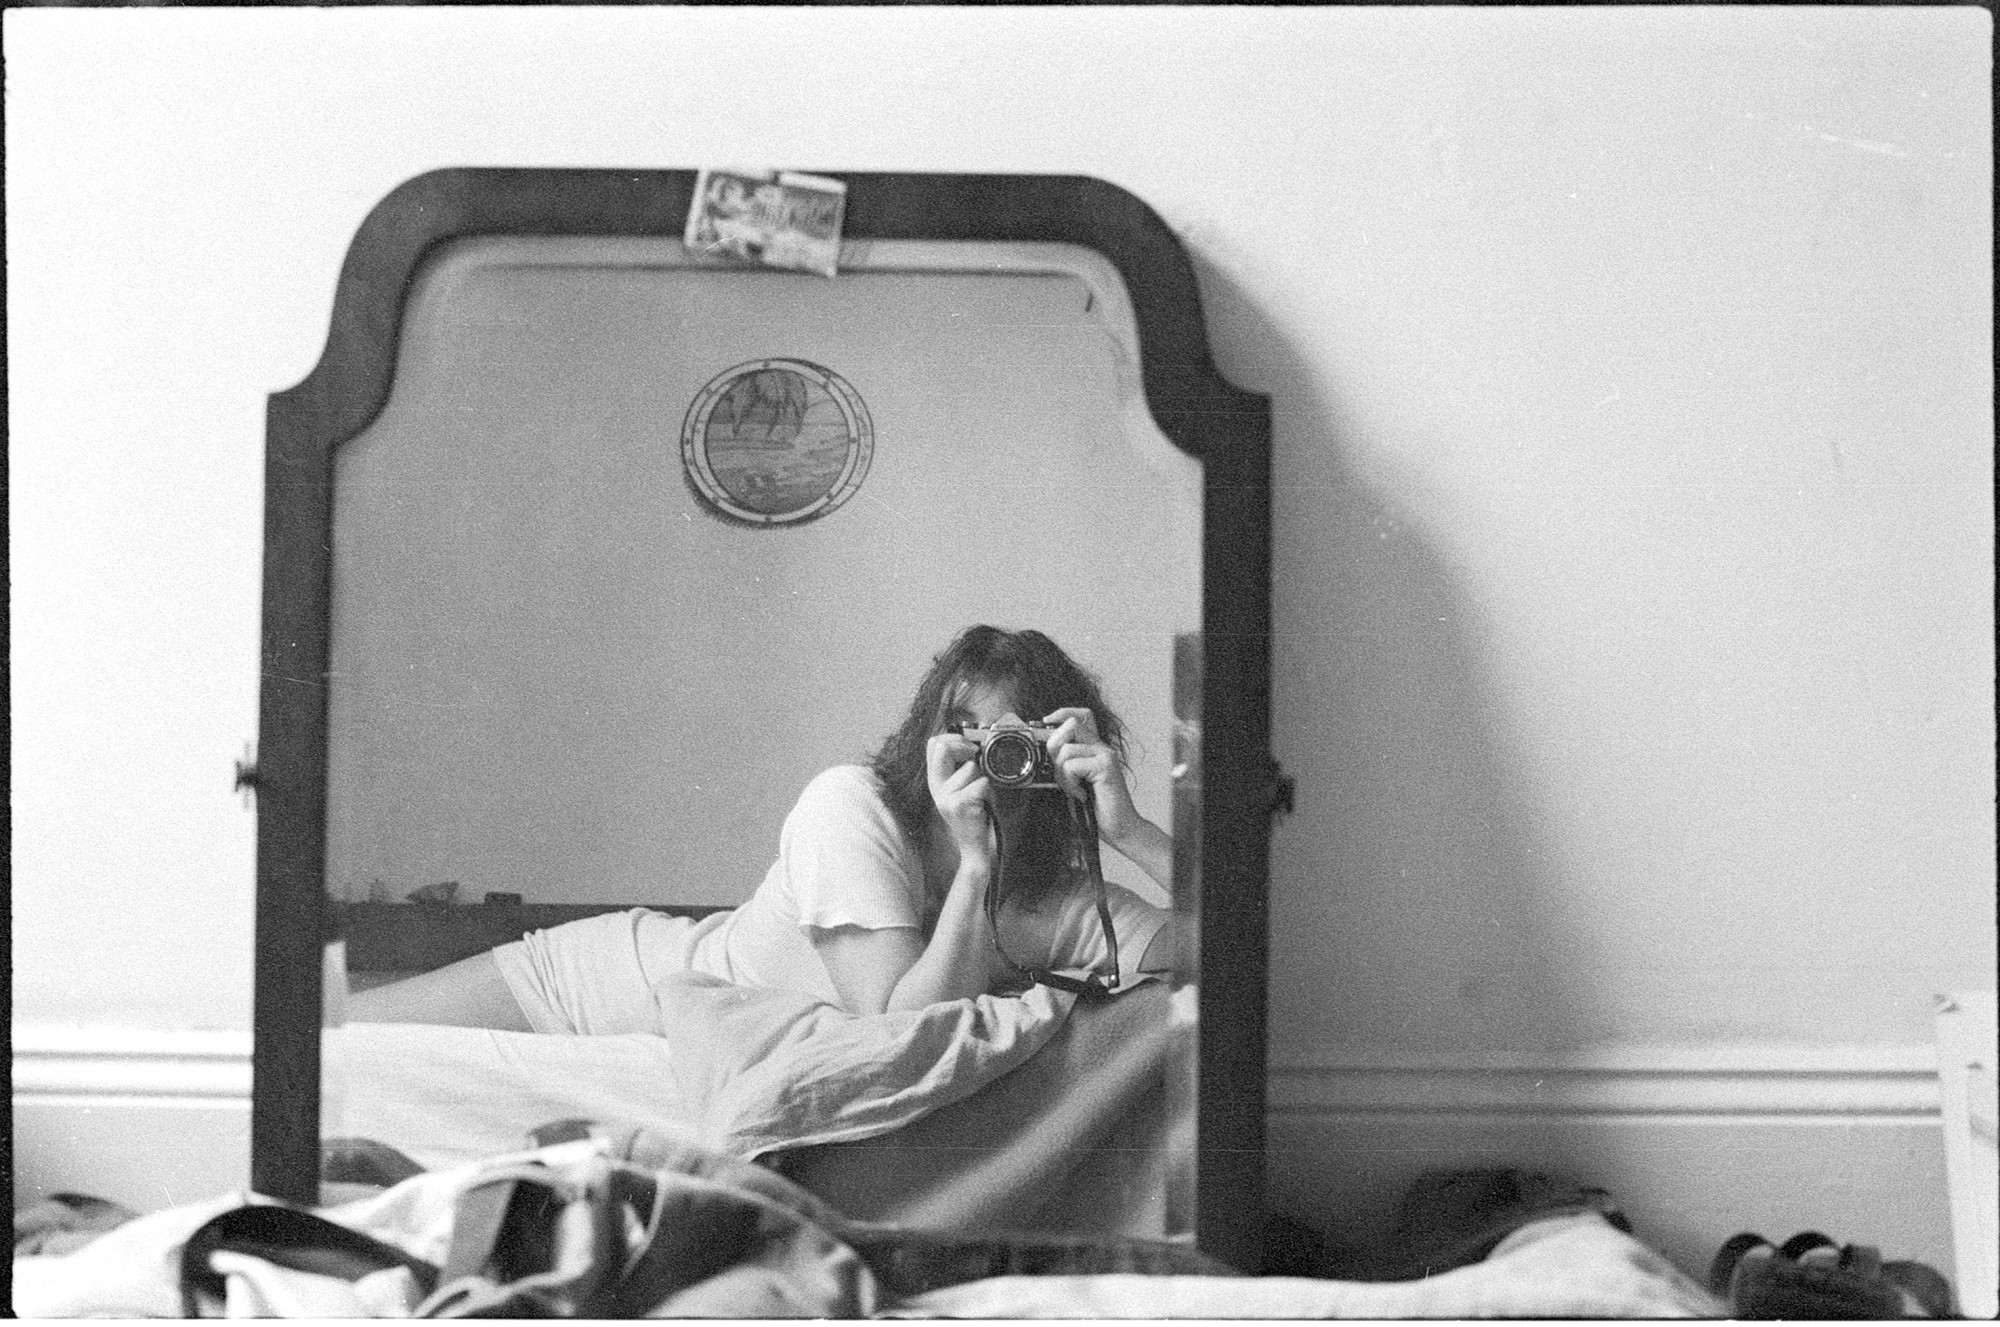 Ruth Maddison, <em>(Self Portrait #2) First roll of film</em>, 1976, archival pigment print, 2020, 26.3 x 40cm. Courtesy of the artist and the Centre for Contemporary Photography.